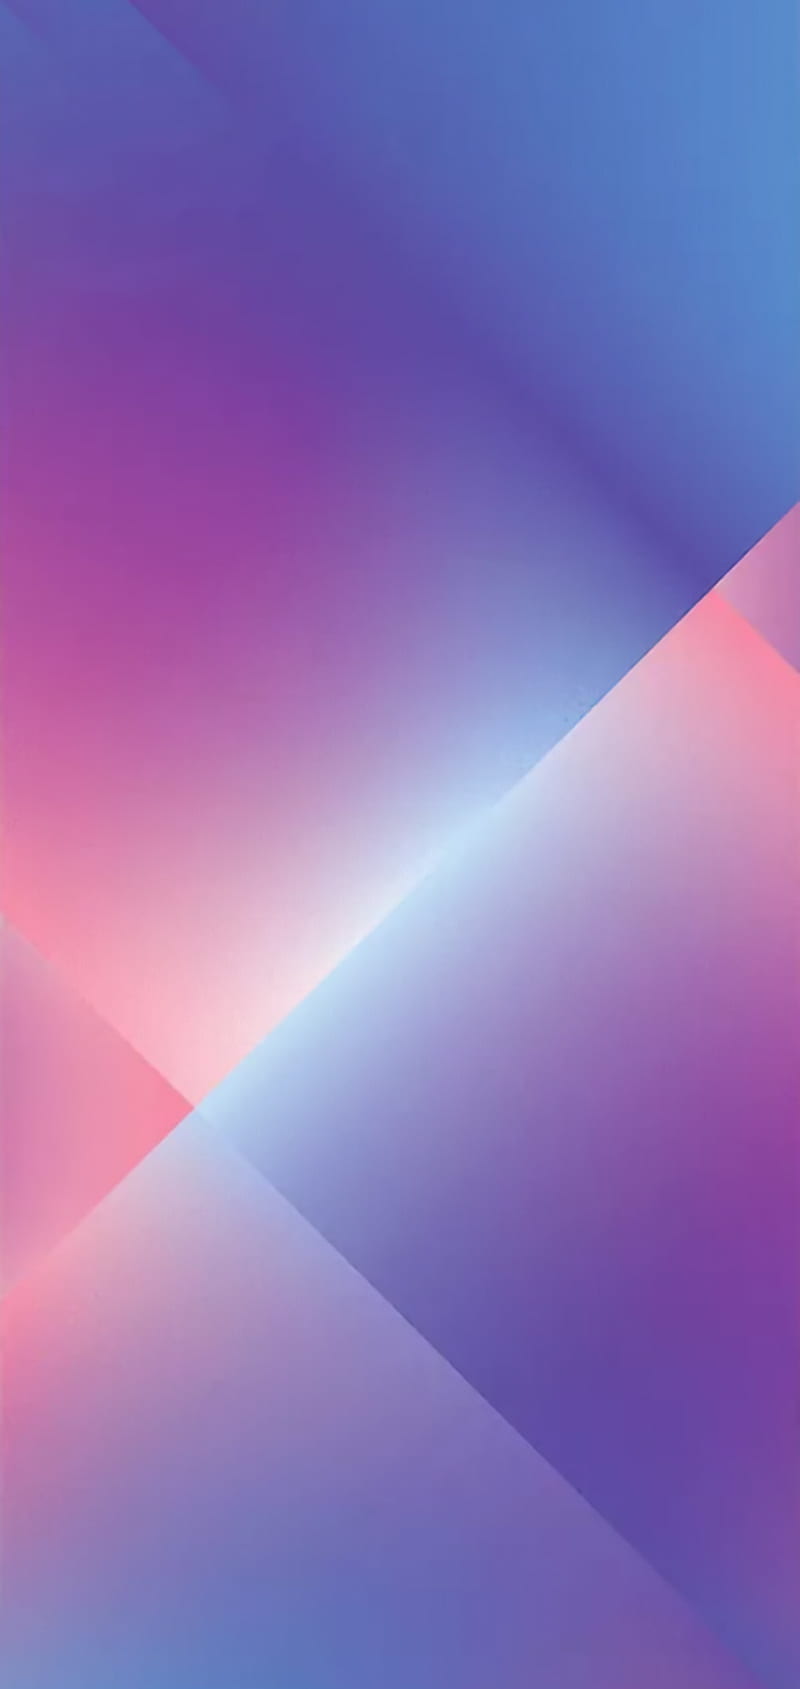 Oppo A5, Colorful, Oppo A7, Hd Phone Wallpaper | Peakpx